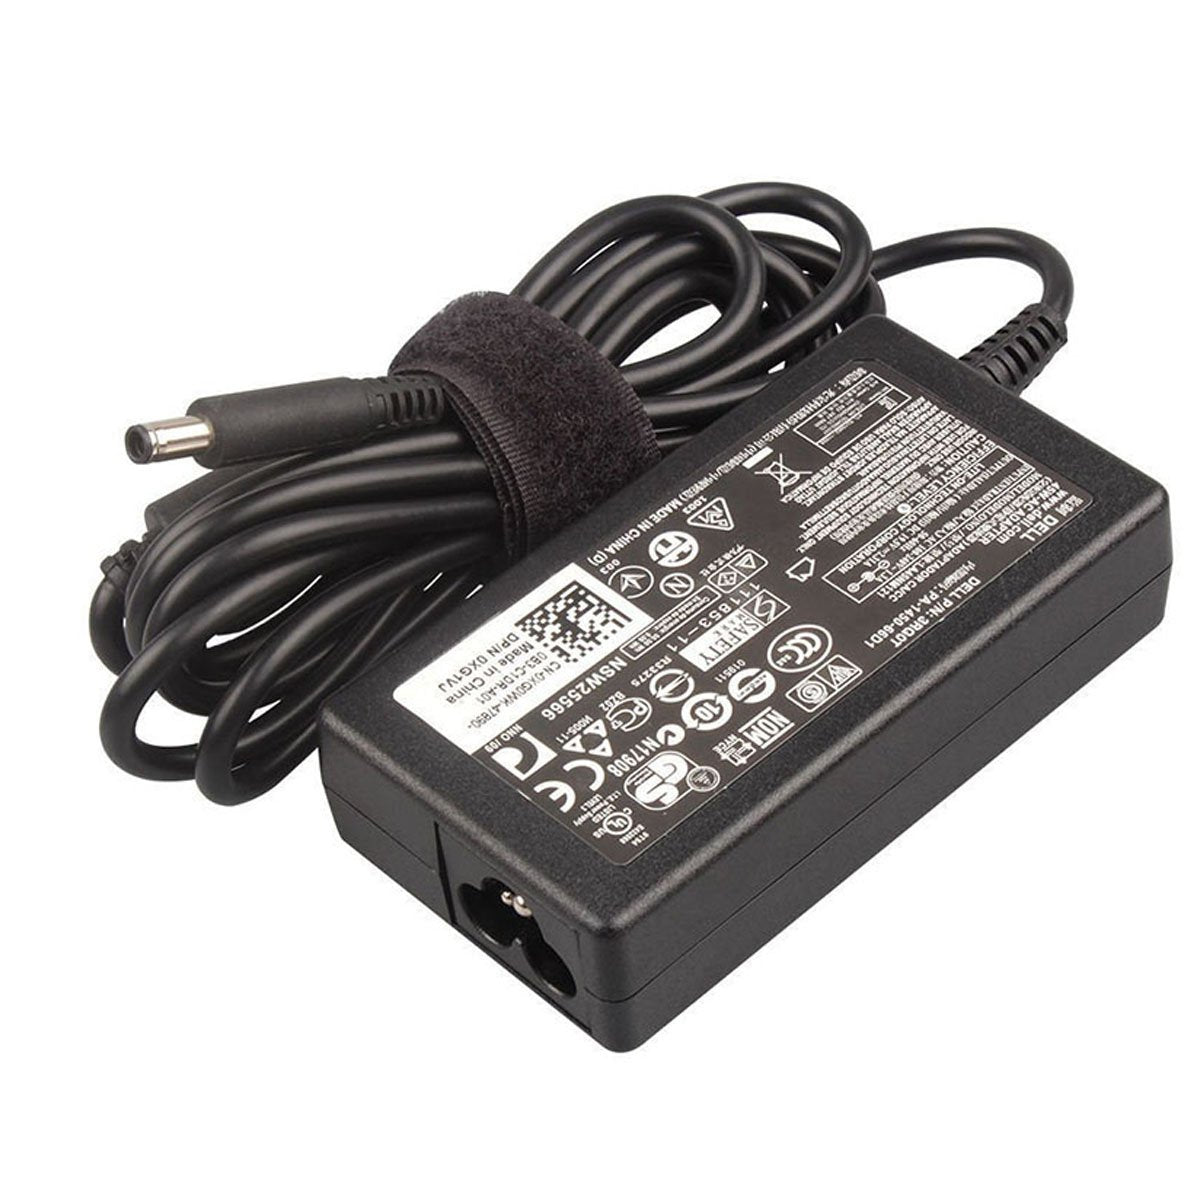 Dell Inspiron 11 3185 Original 45W Laptop Charger Adapter With Power 19.5V 4.5mm Pin